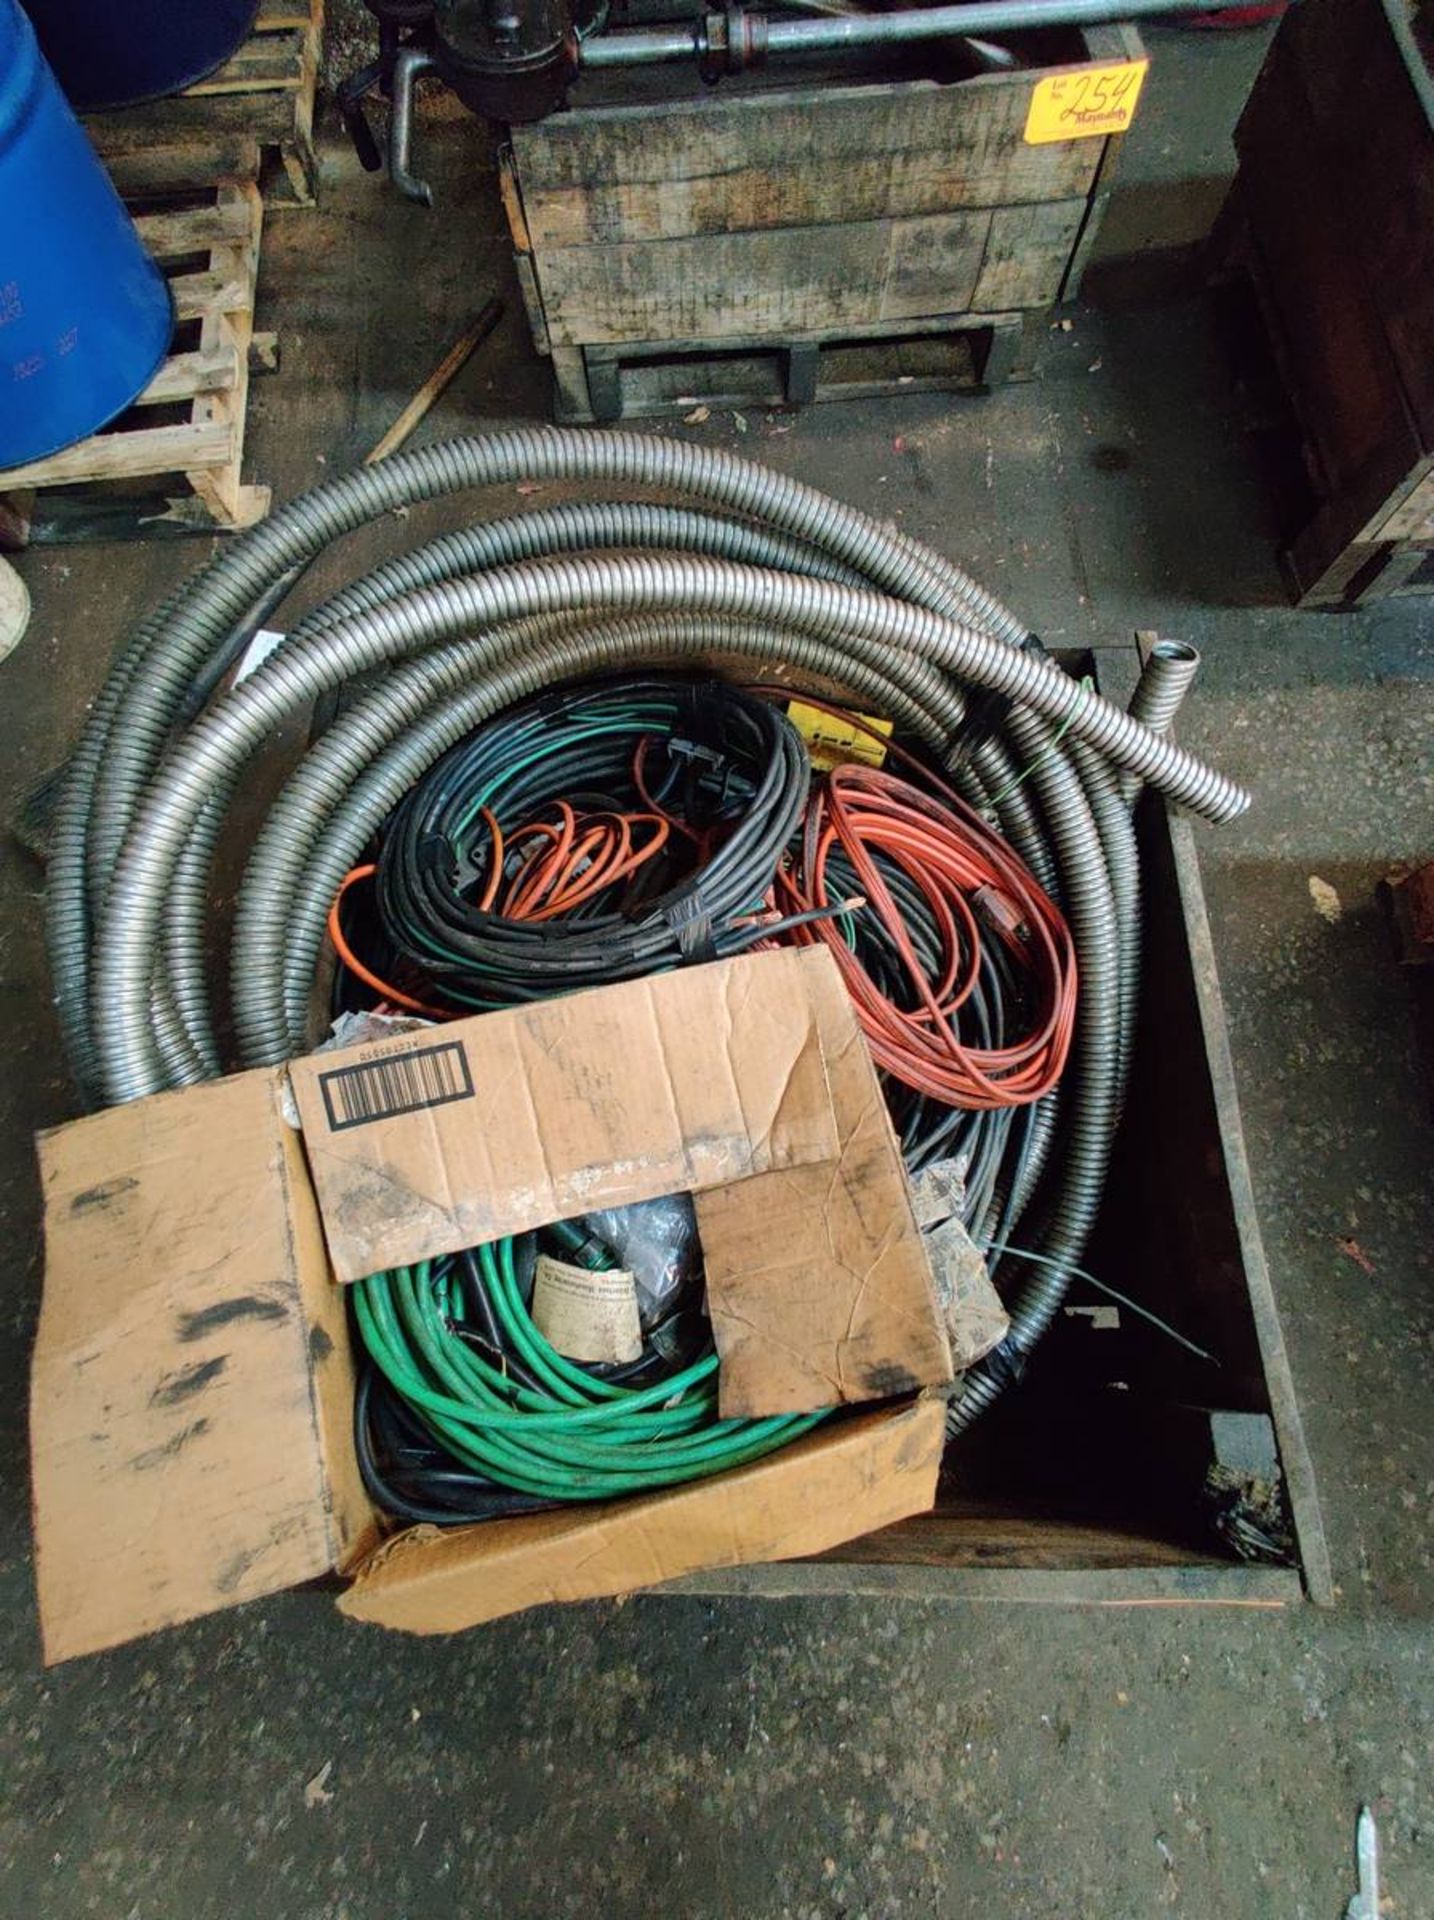 Crates with Assorted Electrical Wire